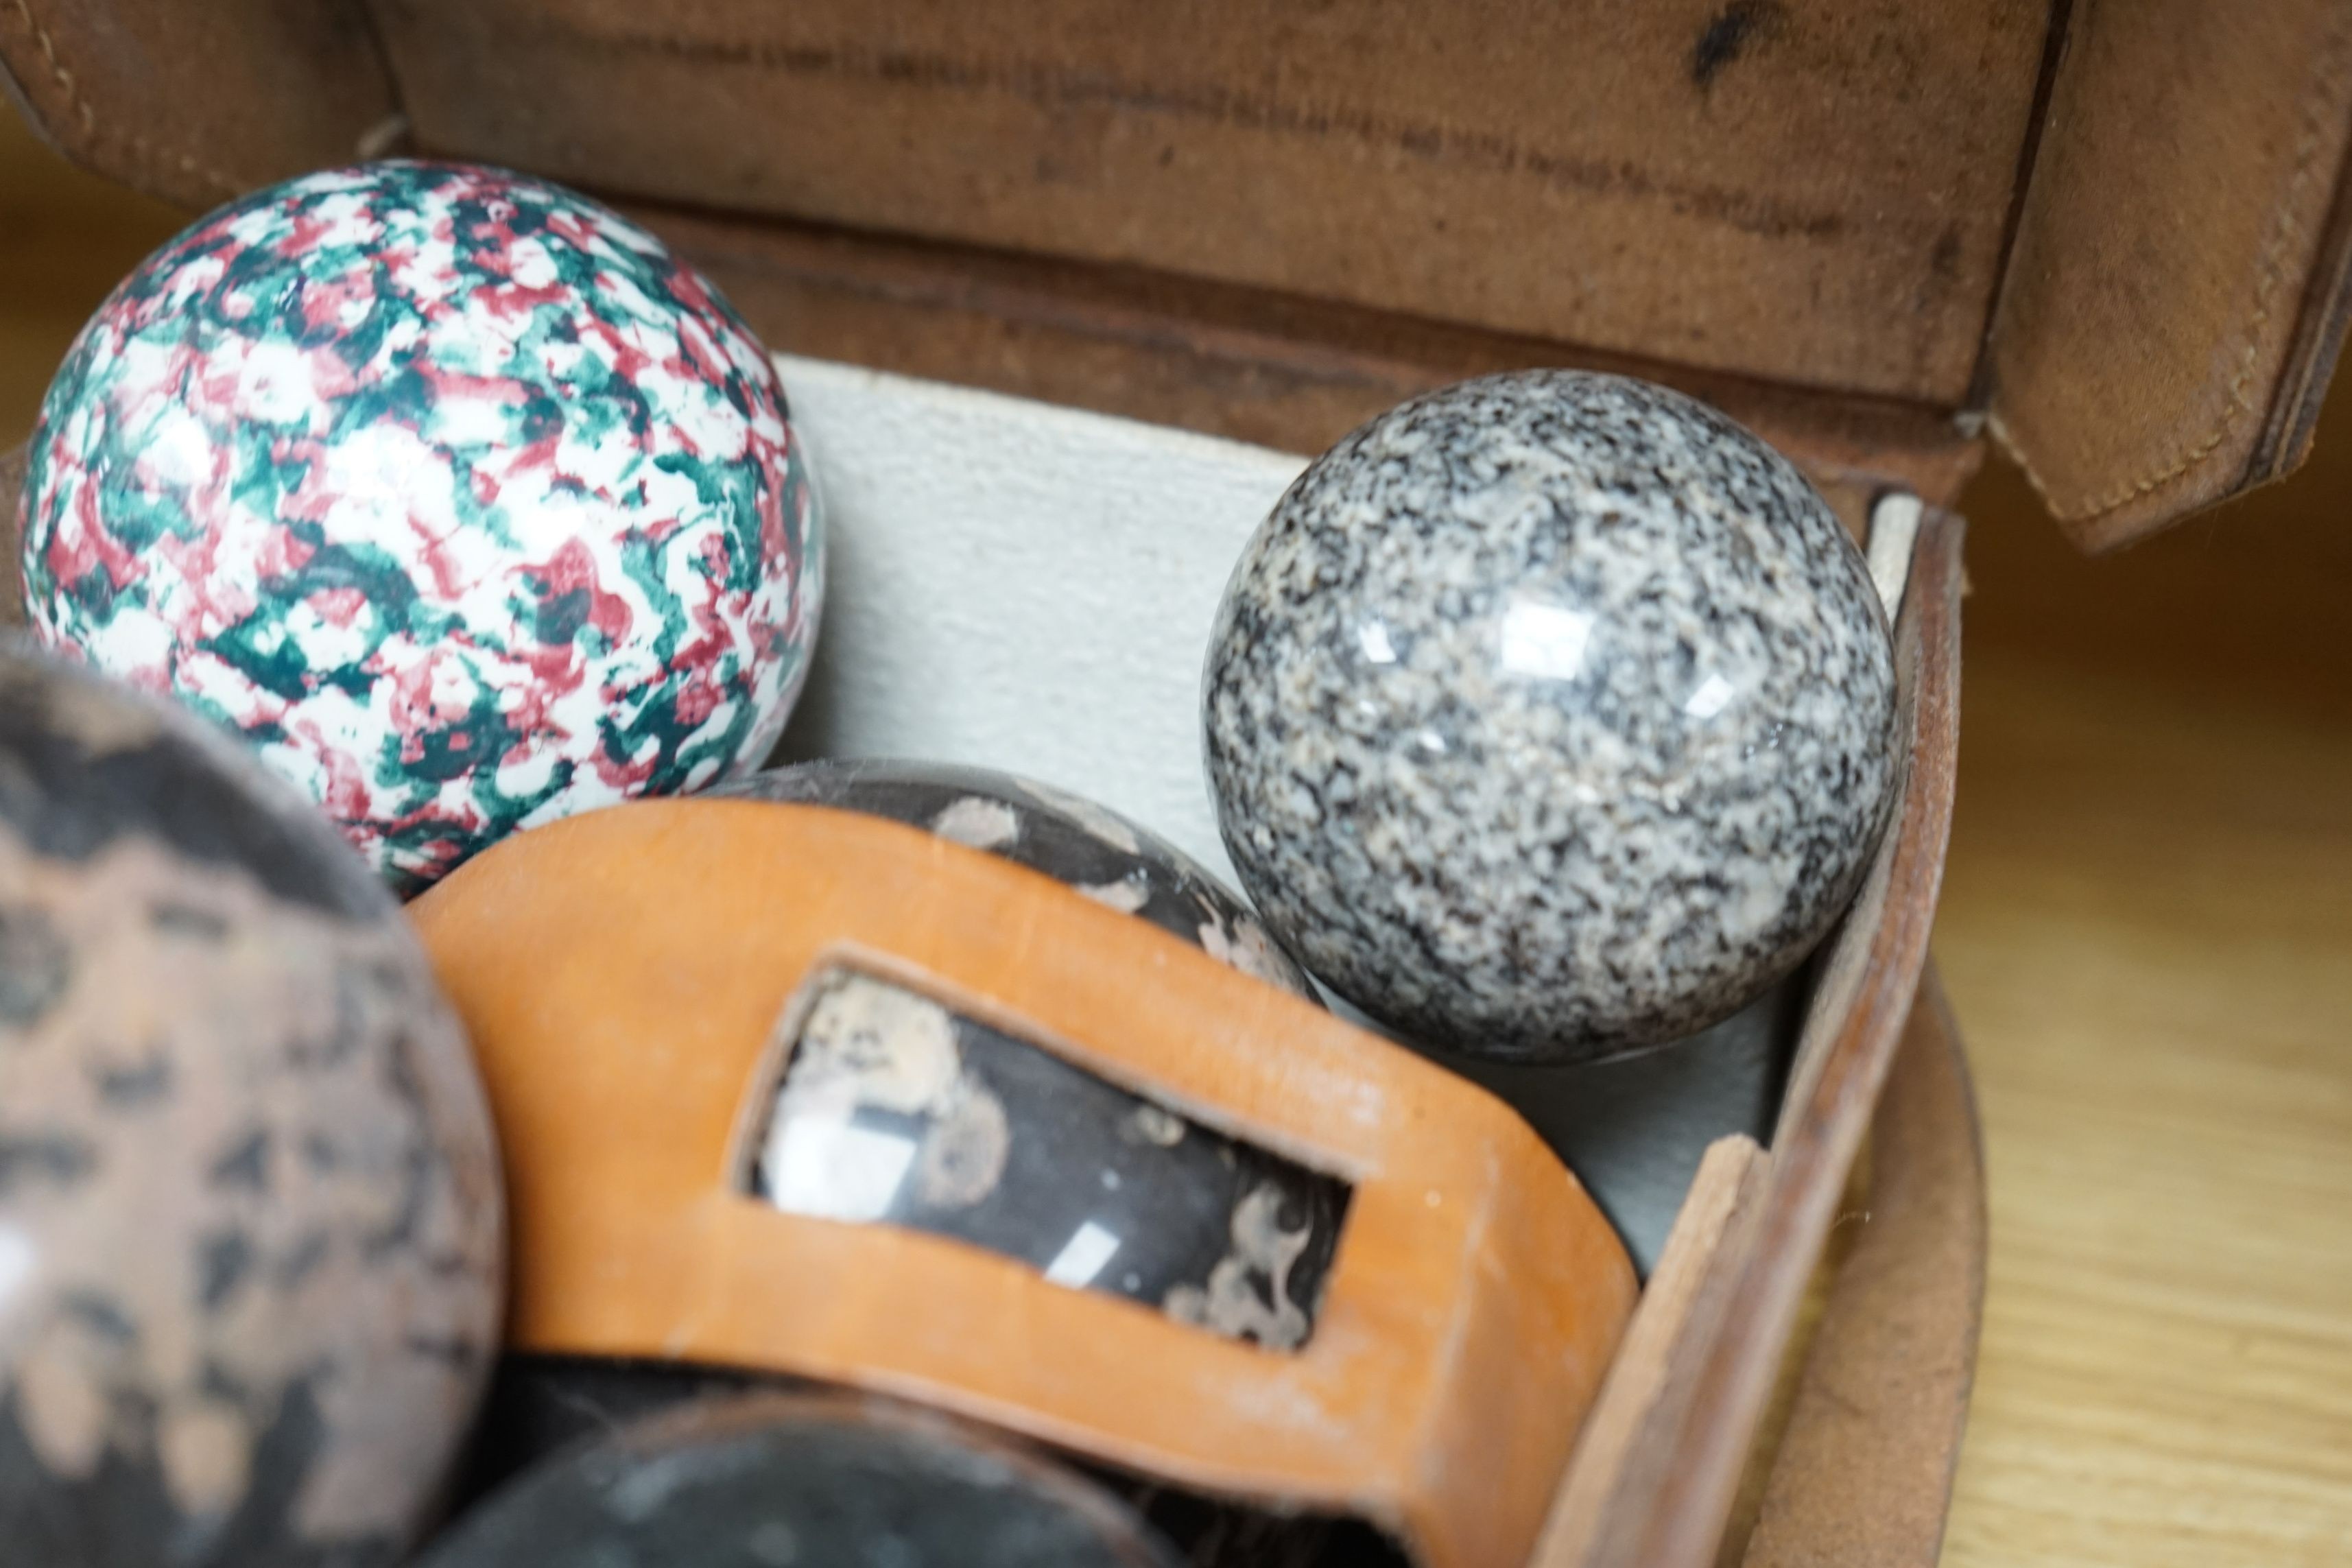 A collection of polished semi-precious stone eggs and balls